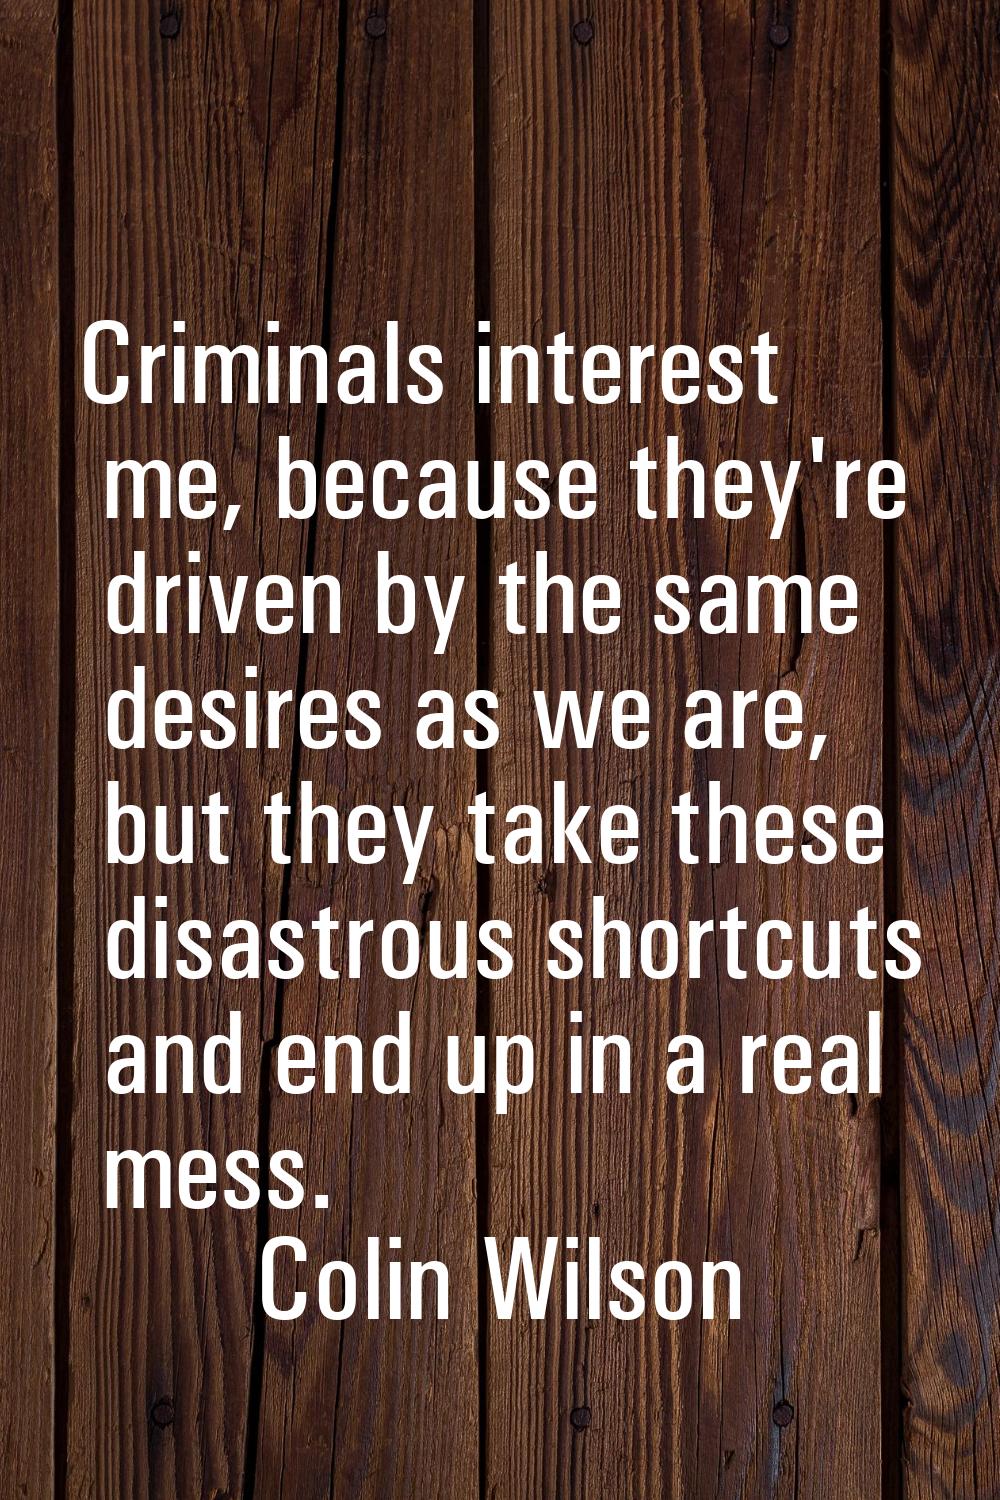 Criminals interest me, because they're driven by the same desires as we are, but they take these di